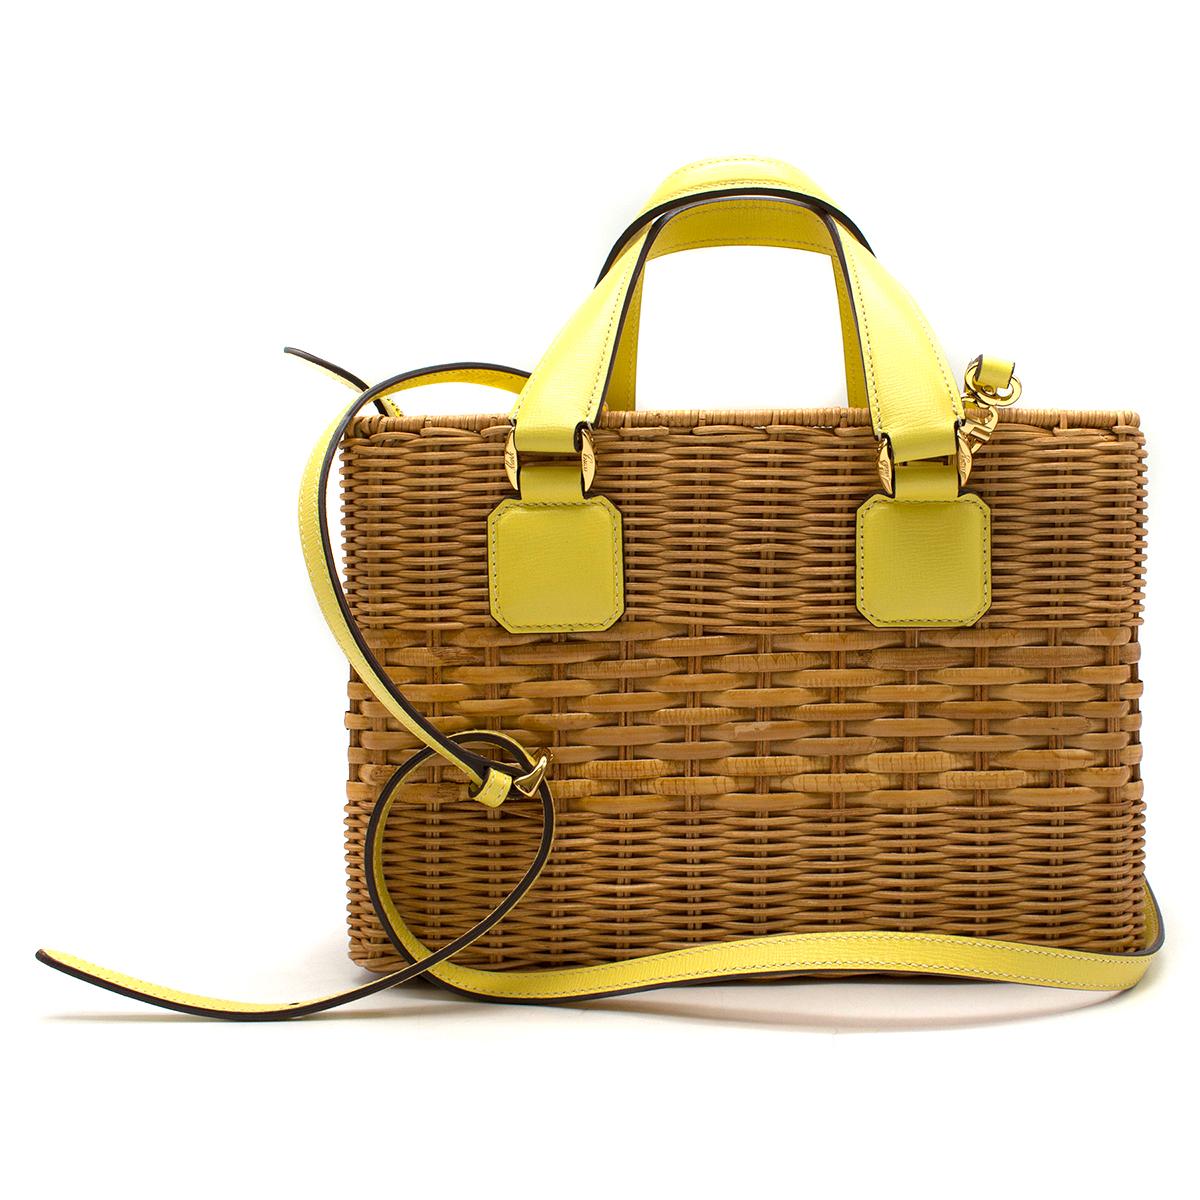 Mark Cross Manray Yellow Tote Bag

- Brown & Yellow Woven Raffia and Leather Contrast Details Tote Bag
- Double yellow leather top handle
- Adjustable and detachable yellow leather shoulder strap
- Gold-plated hardware
- Gold foil stamp logo
- Top